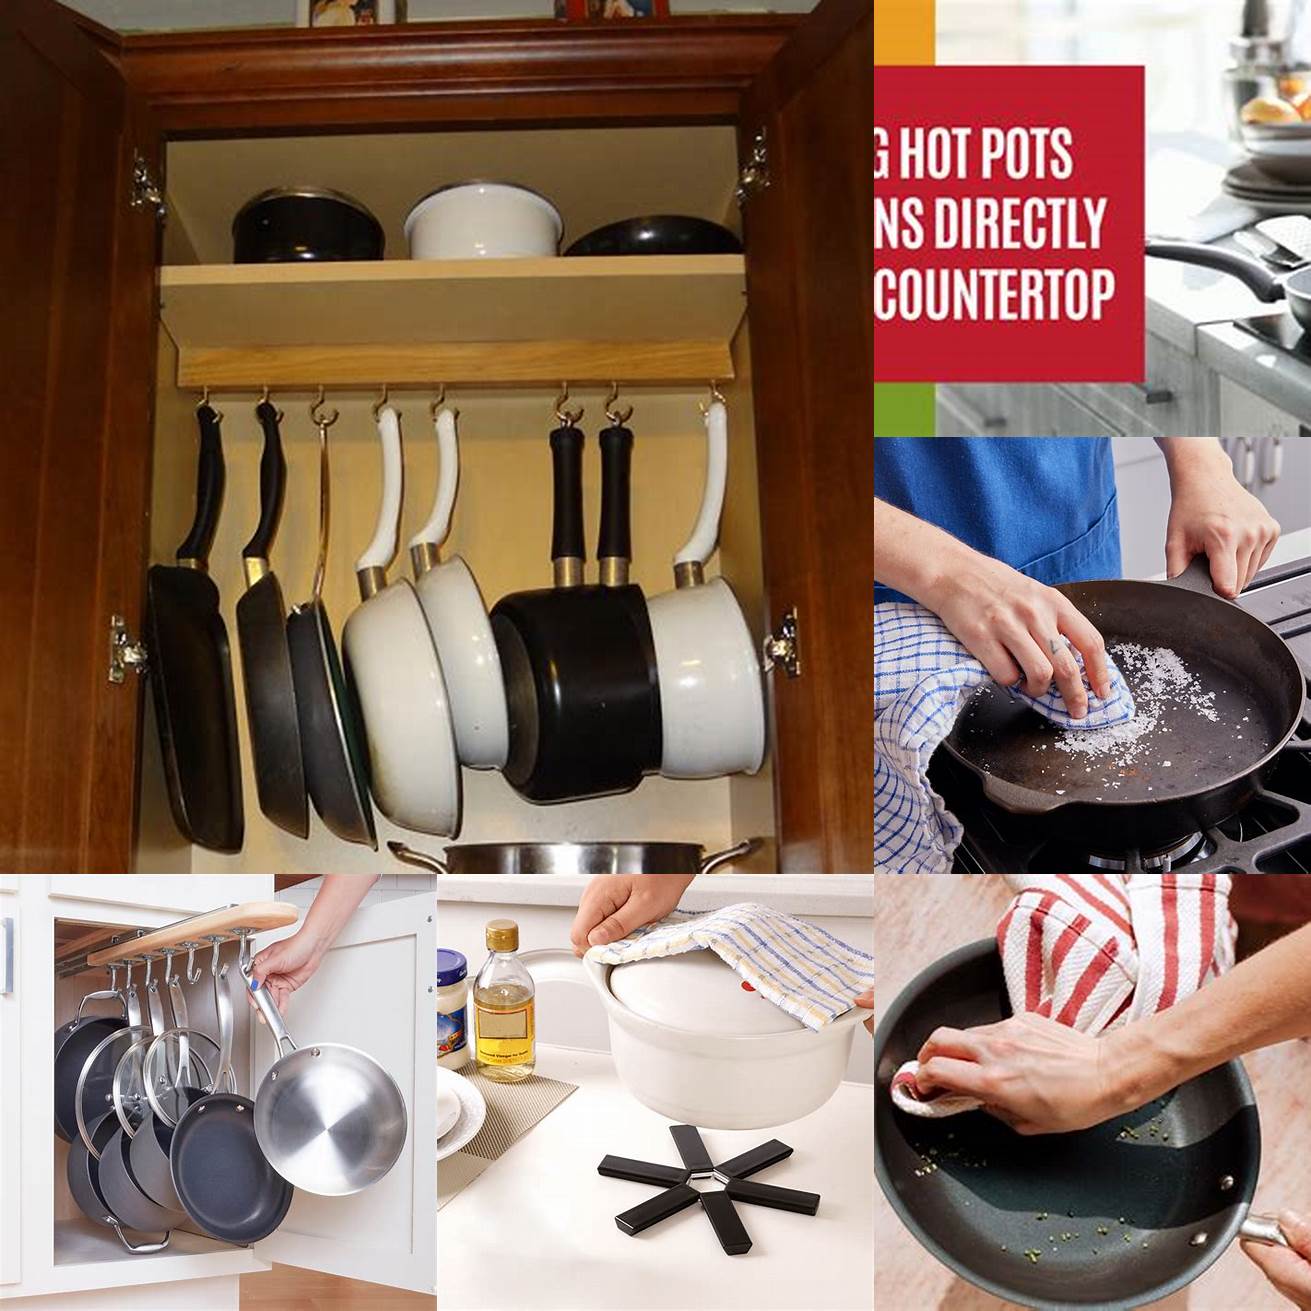 Be mindful of heat and moisture - avoid placing hot pots and pans directly on the cabinets and wipe up spills and splatters immediately to avoid water damage